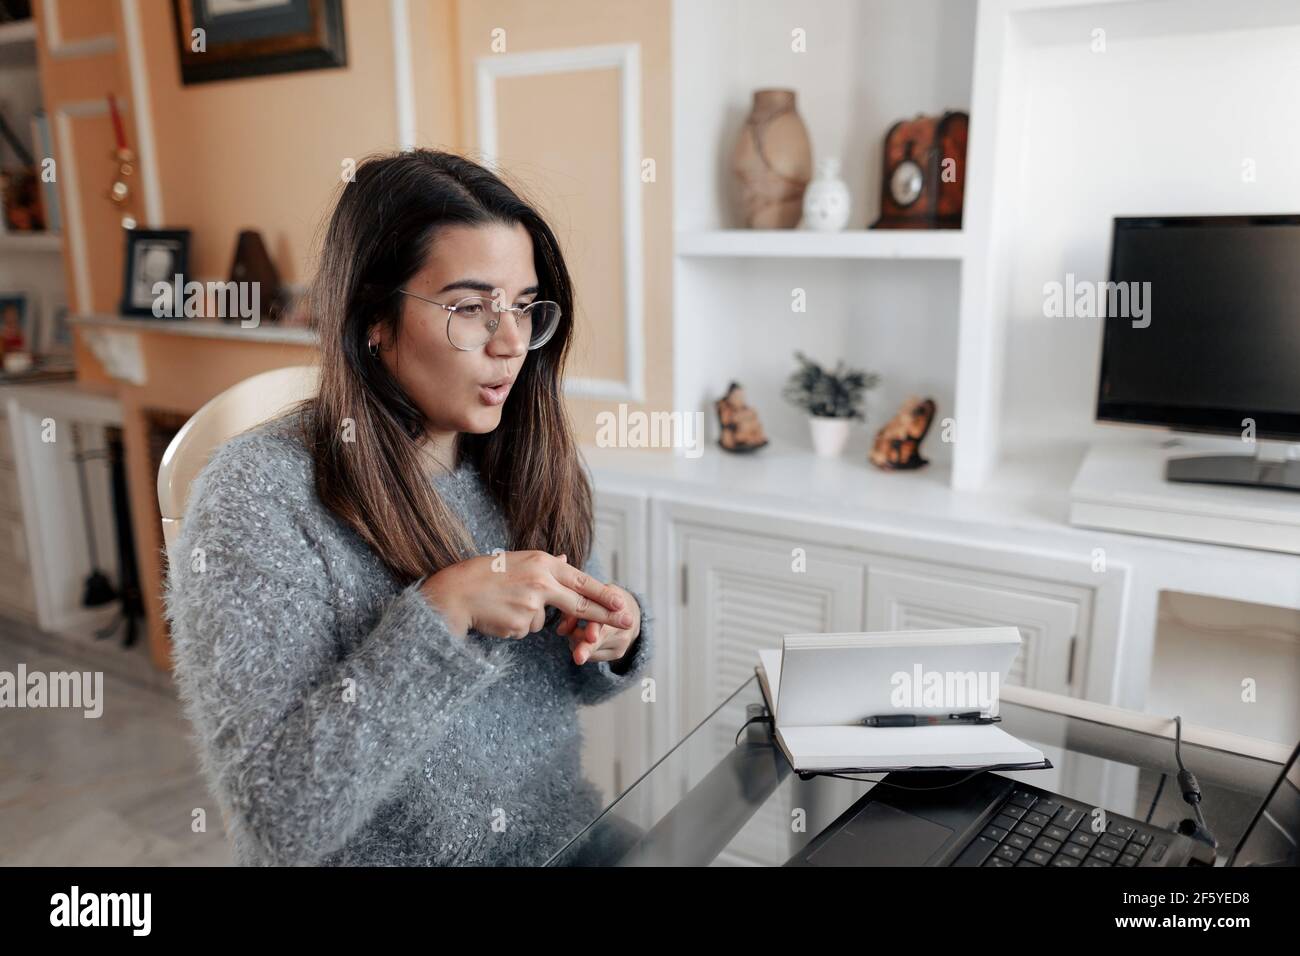 Medium shot young deaf woman wearing glasses and a sweater is using sign language to spell name while in an online video call in her living room. Stock Photo